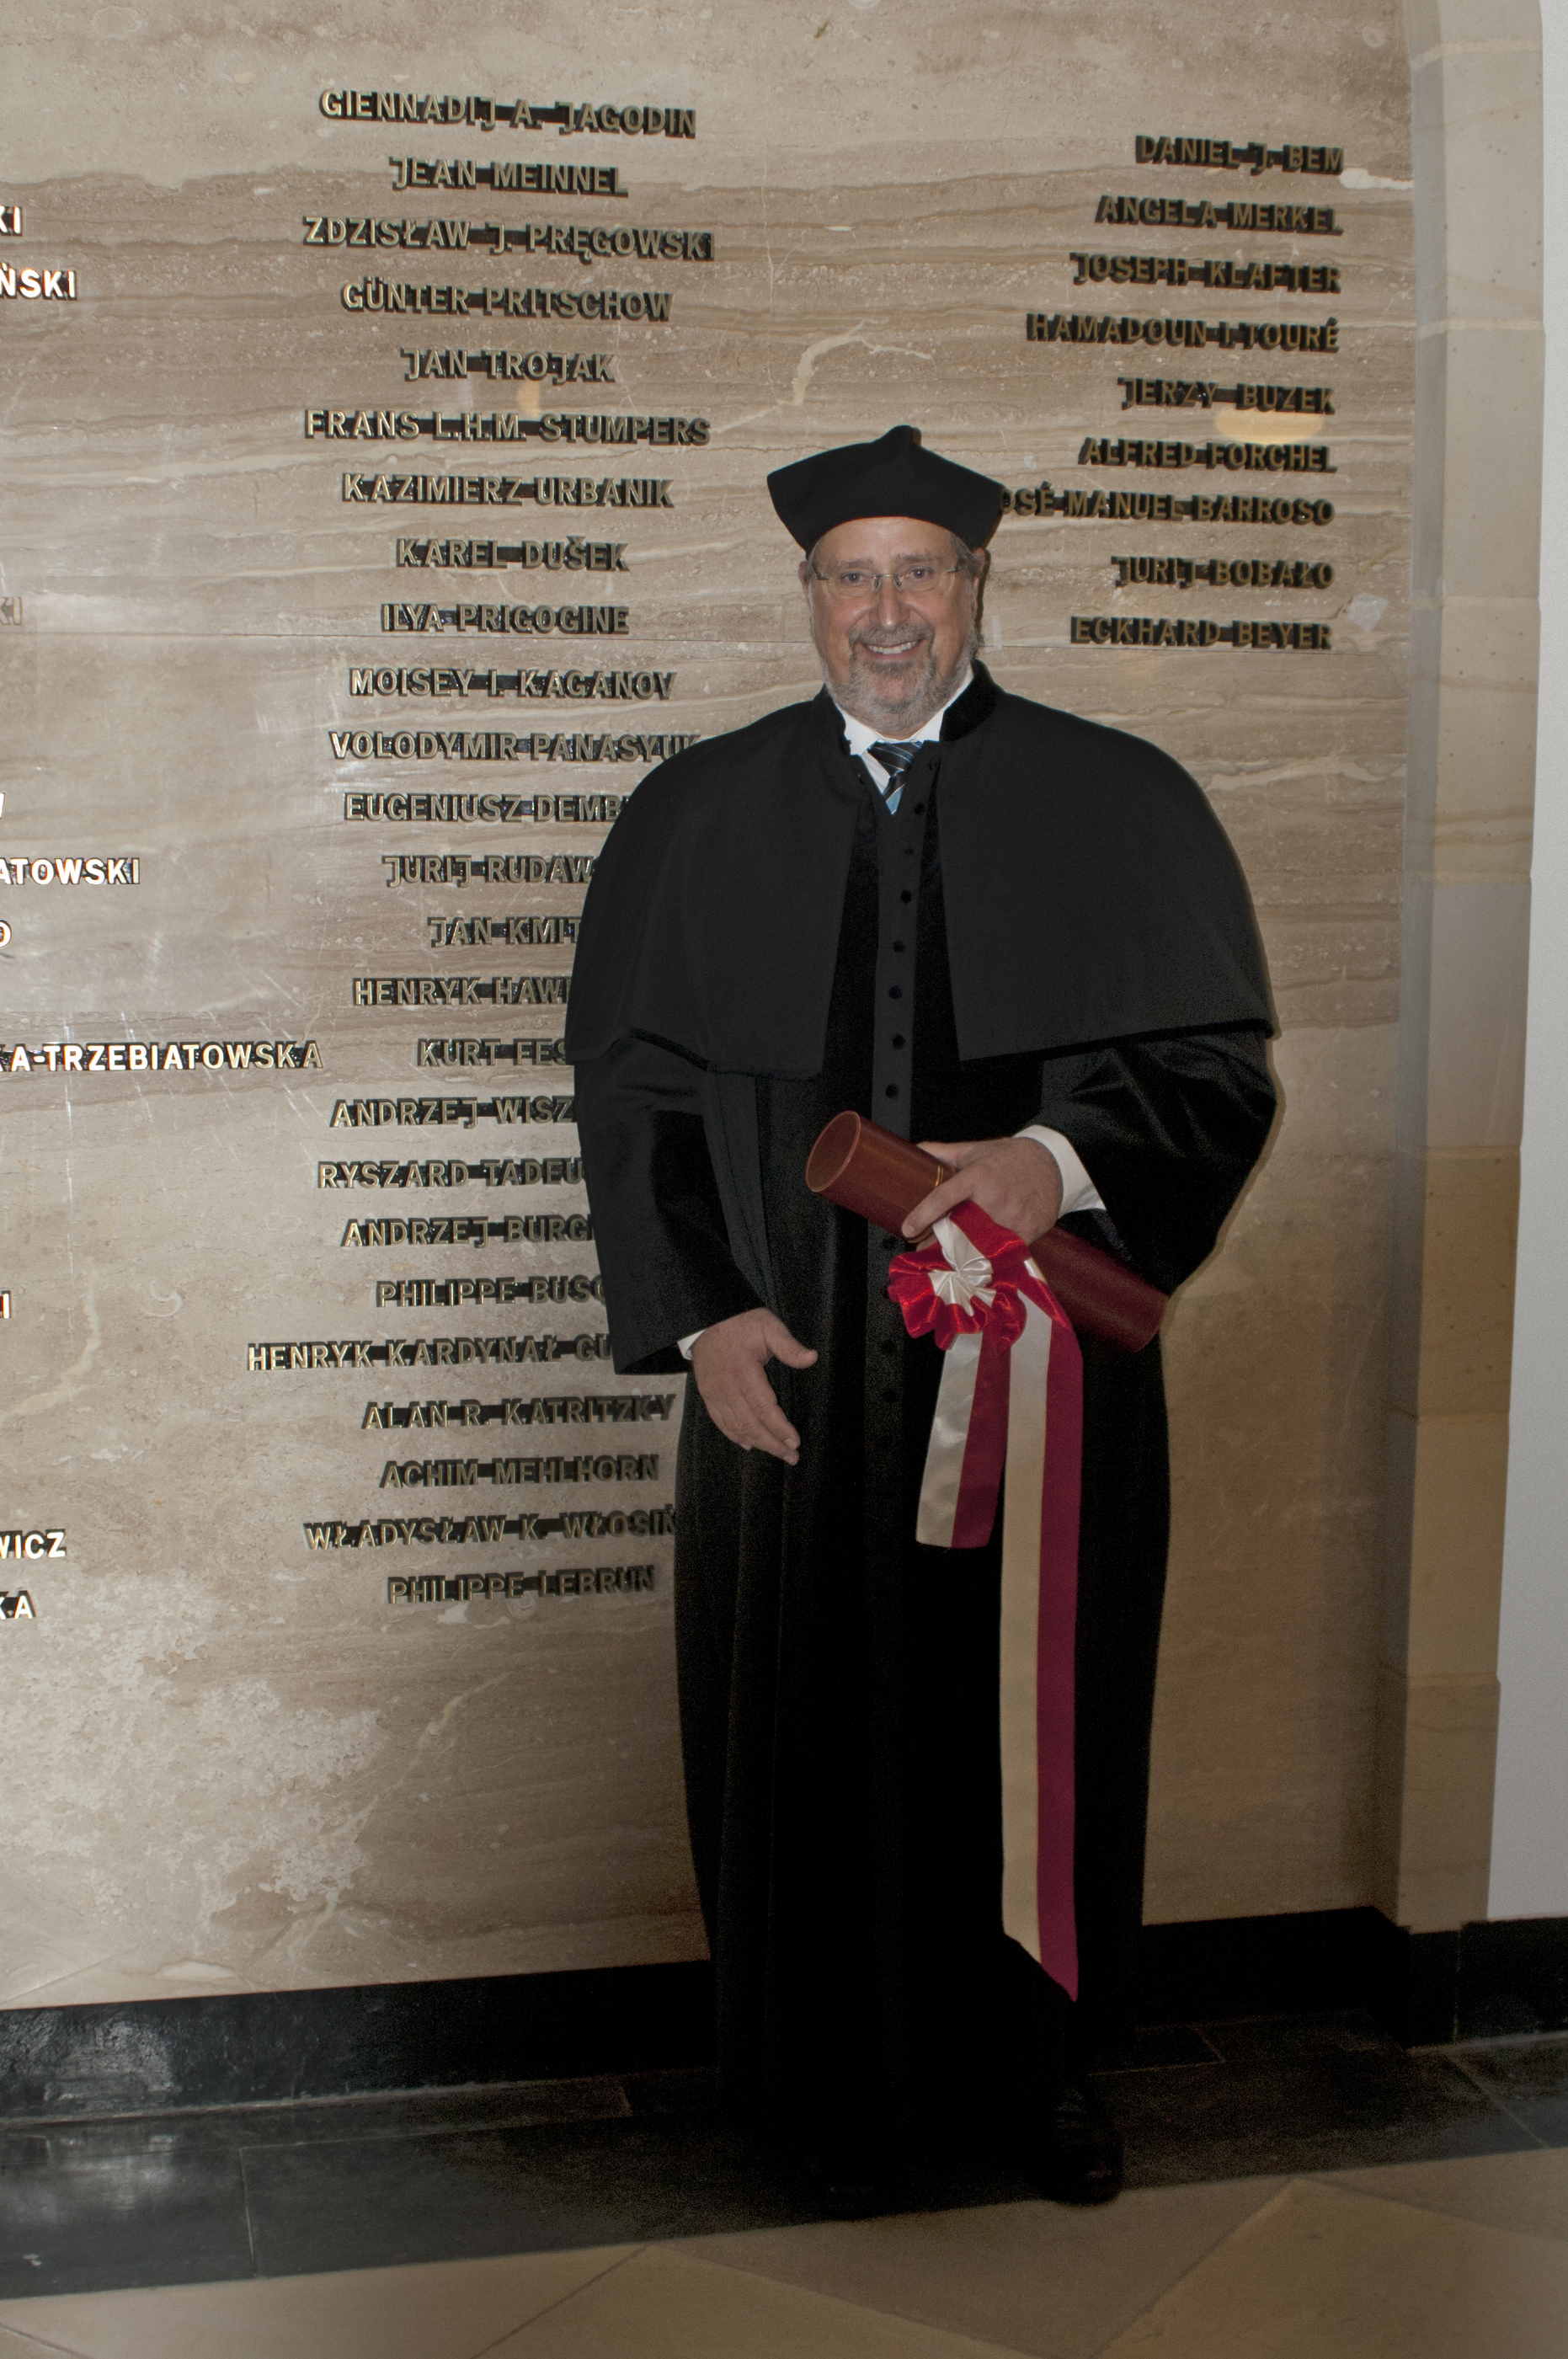 Prof. Dr.-Ing. habil. Eckhard Beyer receives the honorary doctorate degree of the Wroclaw University of Technology